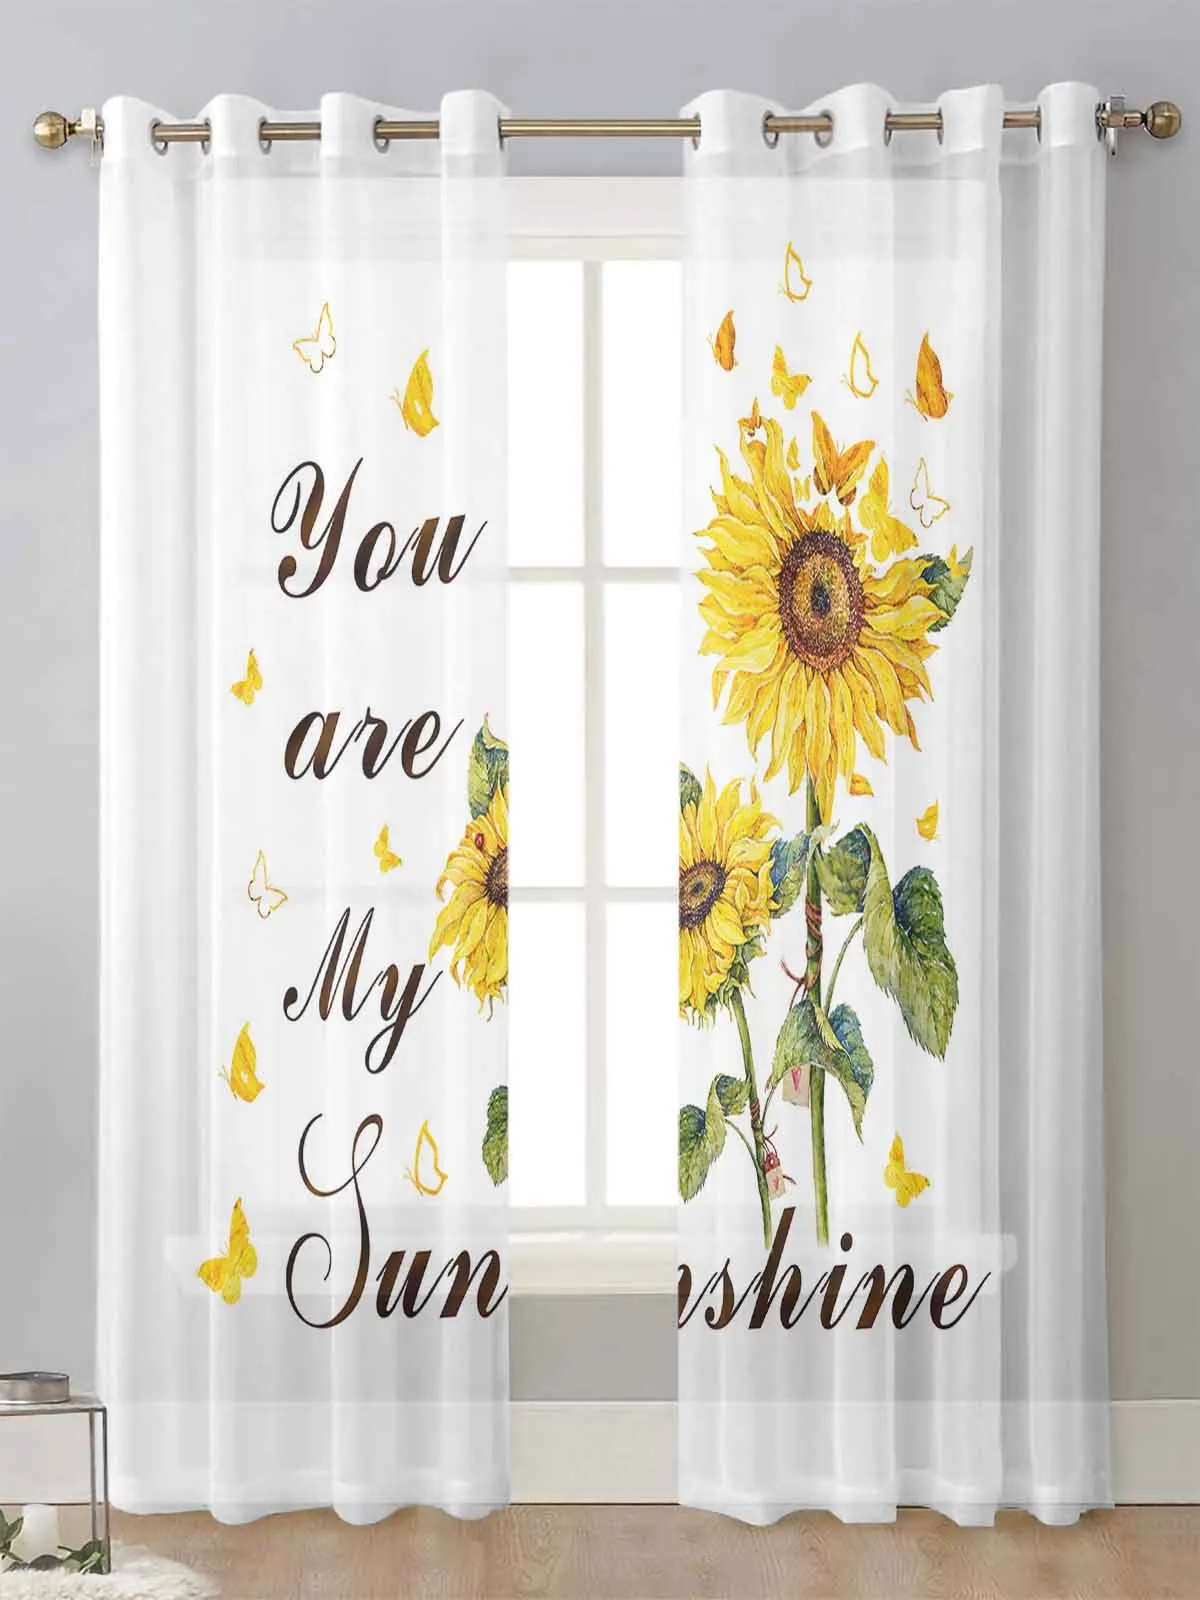 

Sunflower Butterfly White Sheer Curtains For Living Room Window Transparent Voile Tulle Curtain Cortinas Drapes Home Decor